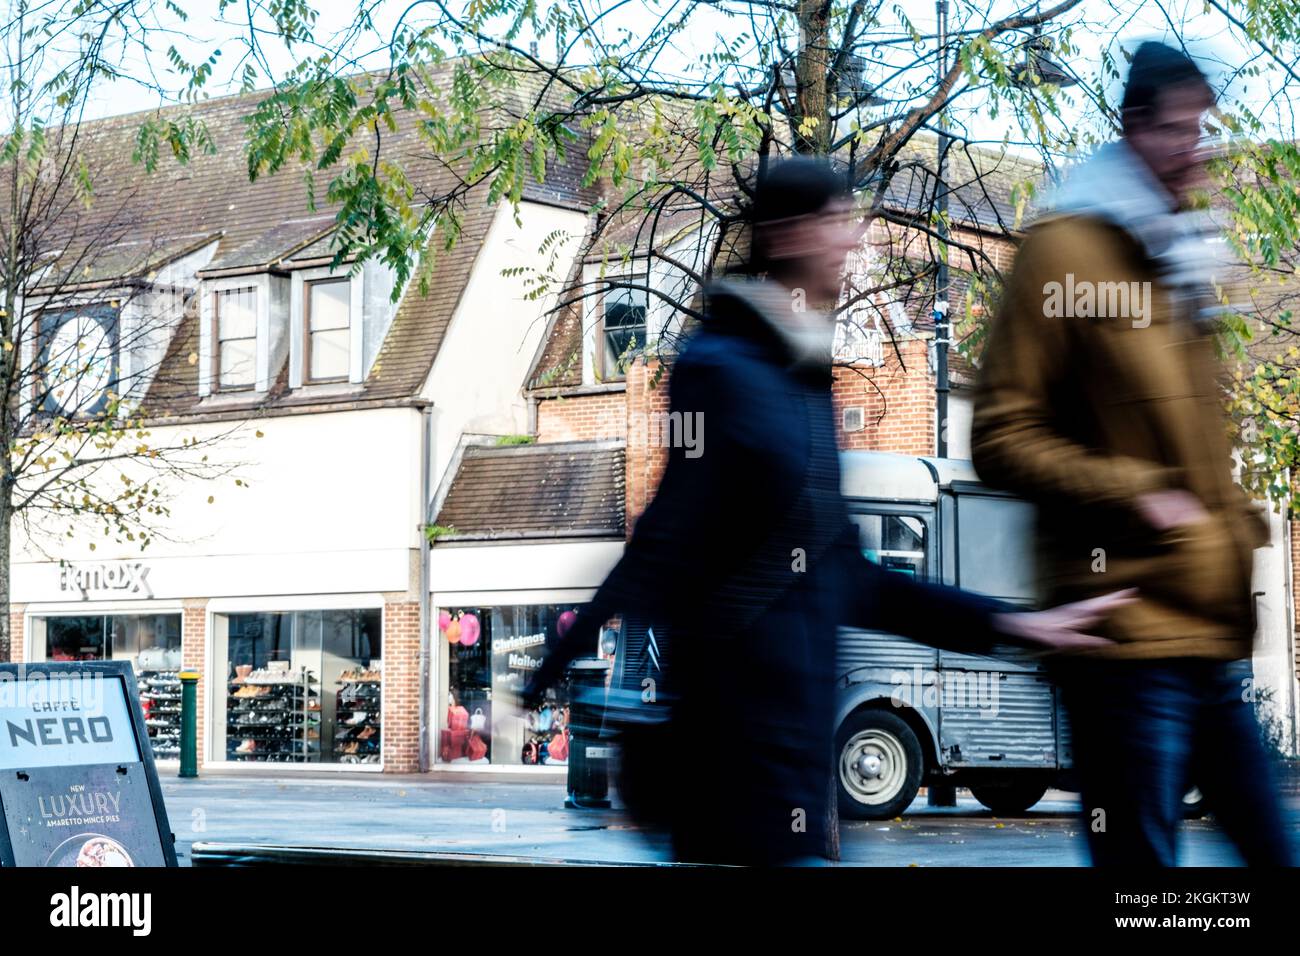 Epsom, Surrey, London UK, November 20 2022, Young Couple Walking Past A Cafe Nero Showing Motion And Movement With Blurred People Against Focused Back Stock Photo